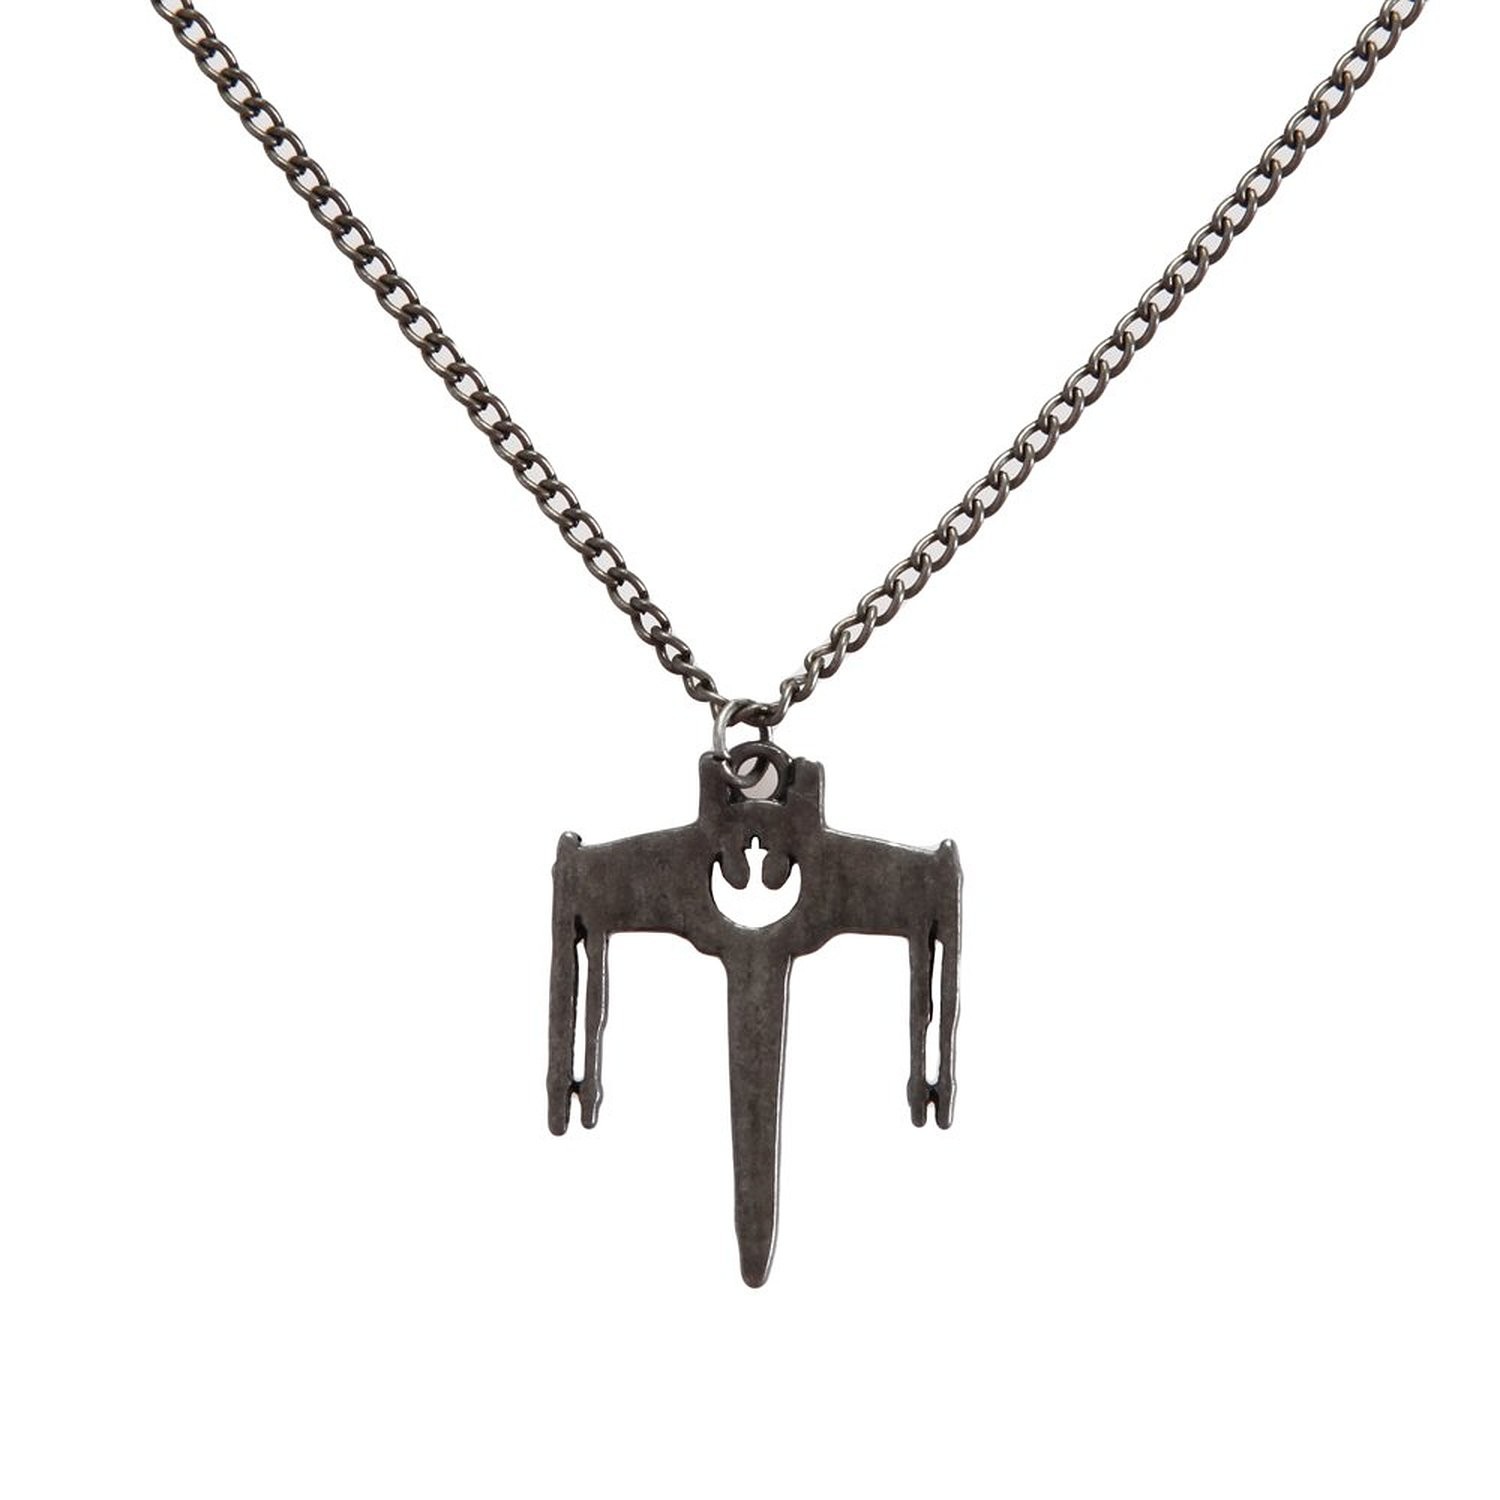 Star Wars X-Wing Fighter Rebel Alliance symbol cut-out necklace on Amazon